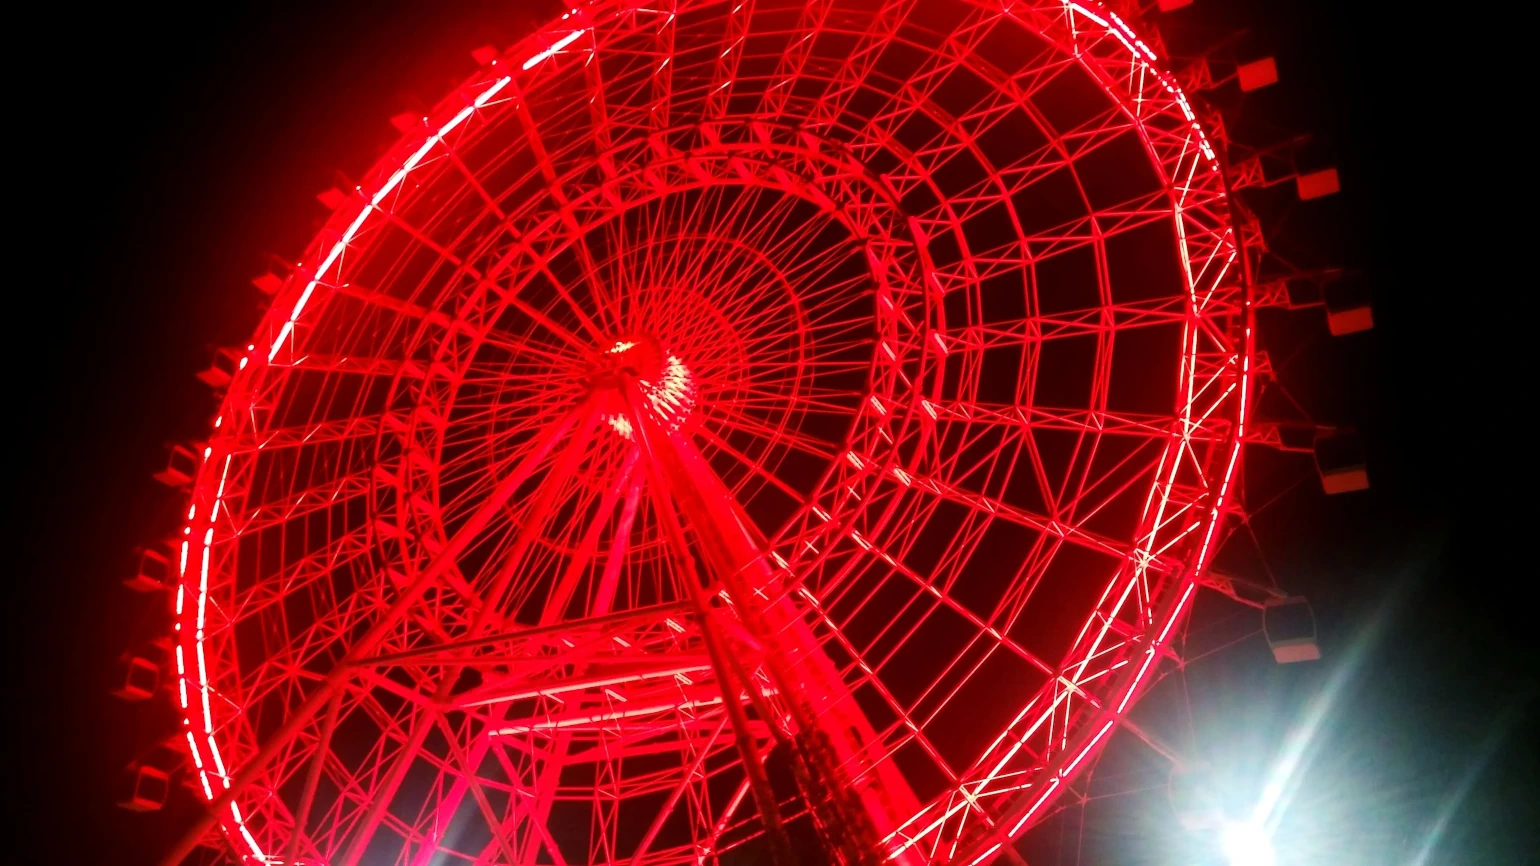 A ferris wheel lit up by red lights at night